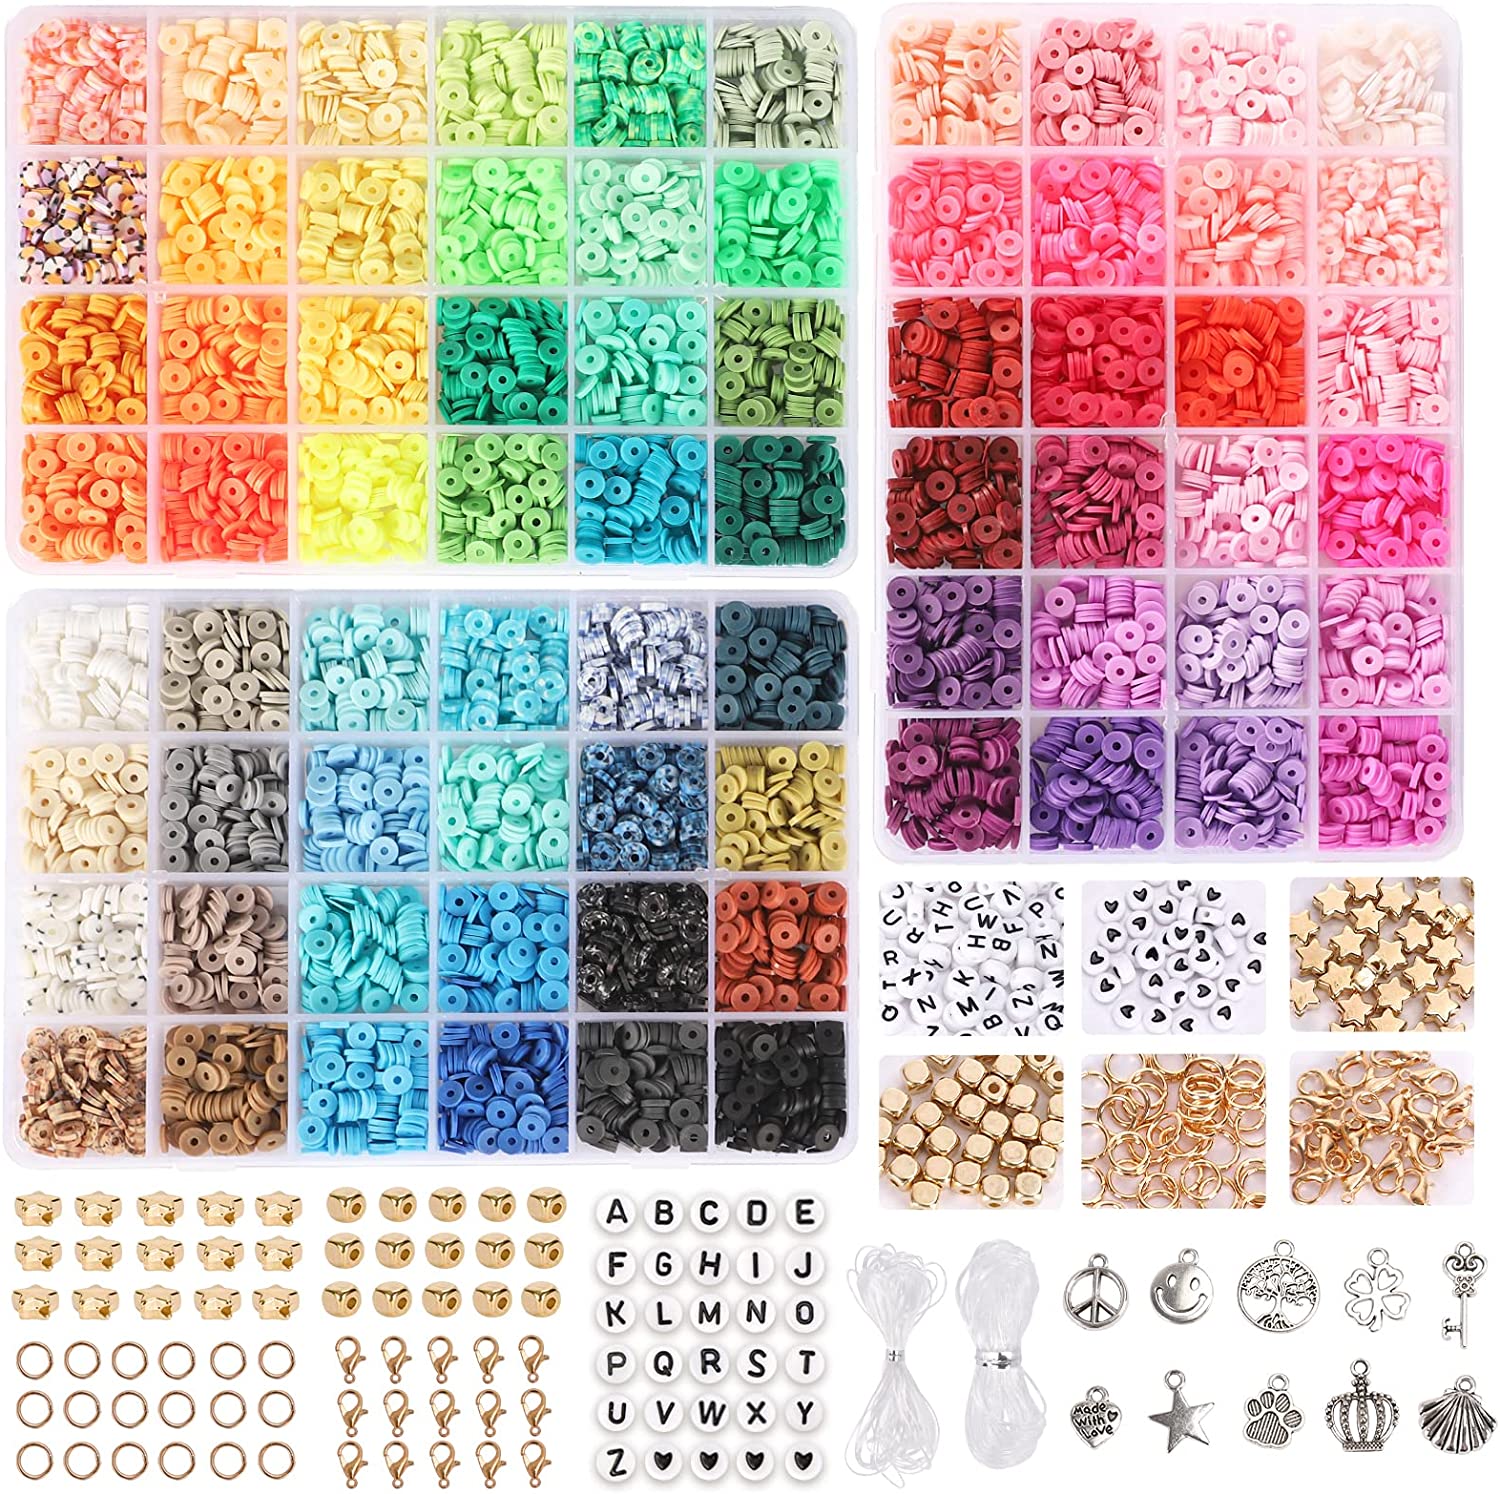 QUEFE 72 Colors Clay Beads for Bracelet Making Kit Flat Round Polymer Clay  Beads Spacer Heishi Beads for Jewelry Making with Random Pendant Charms Kit